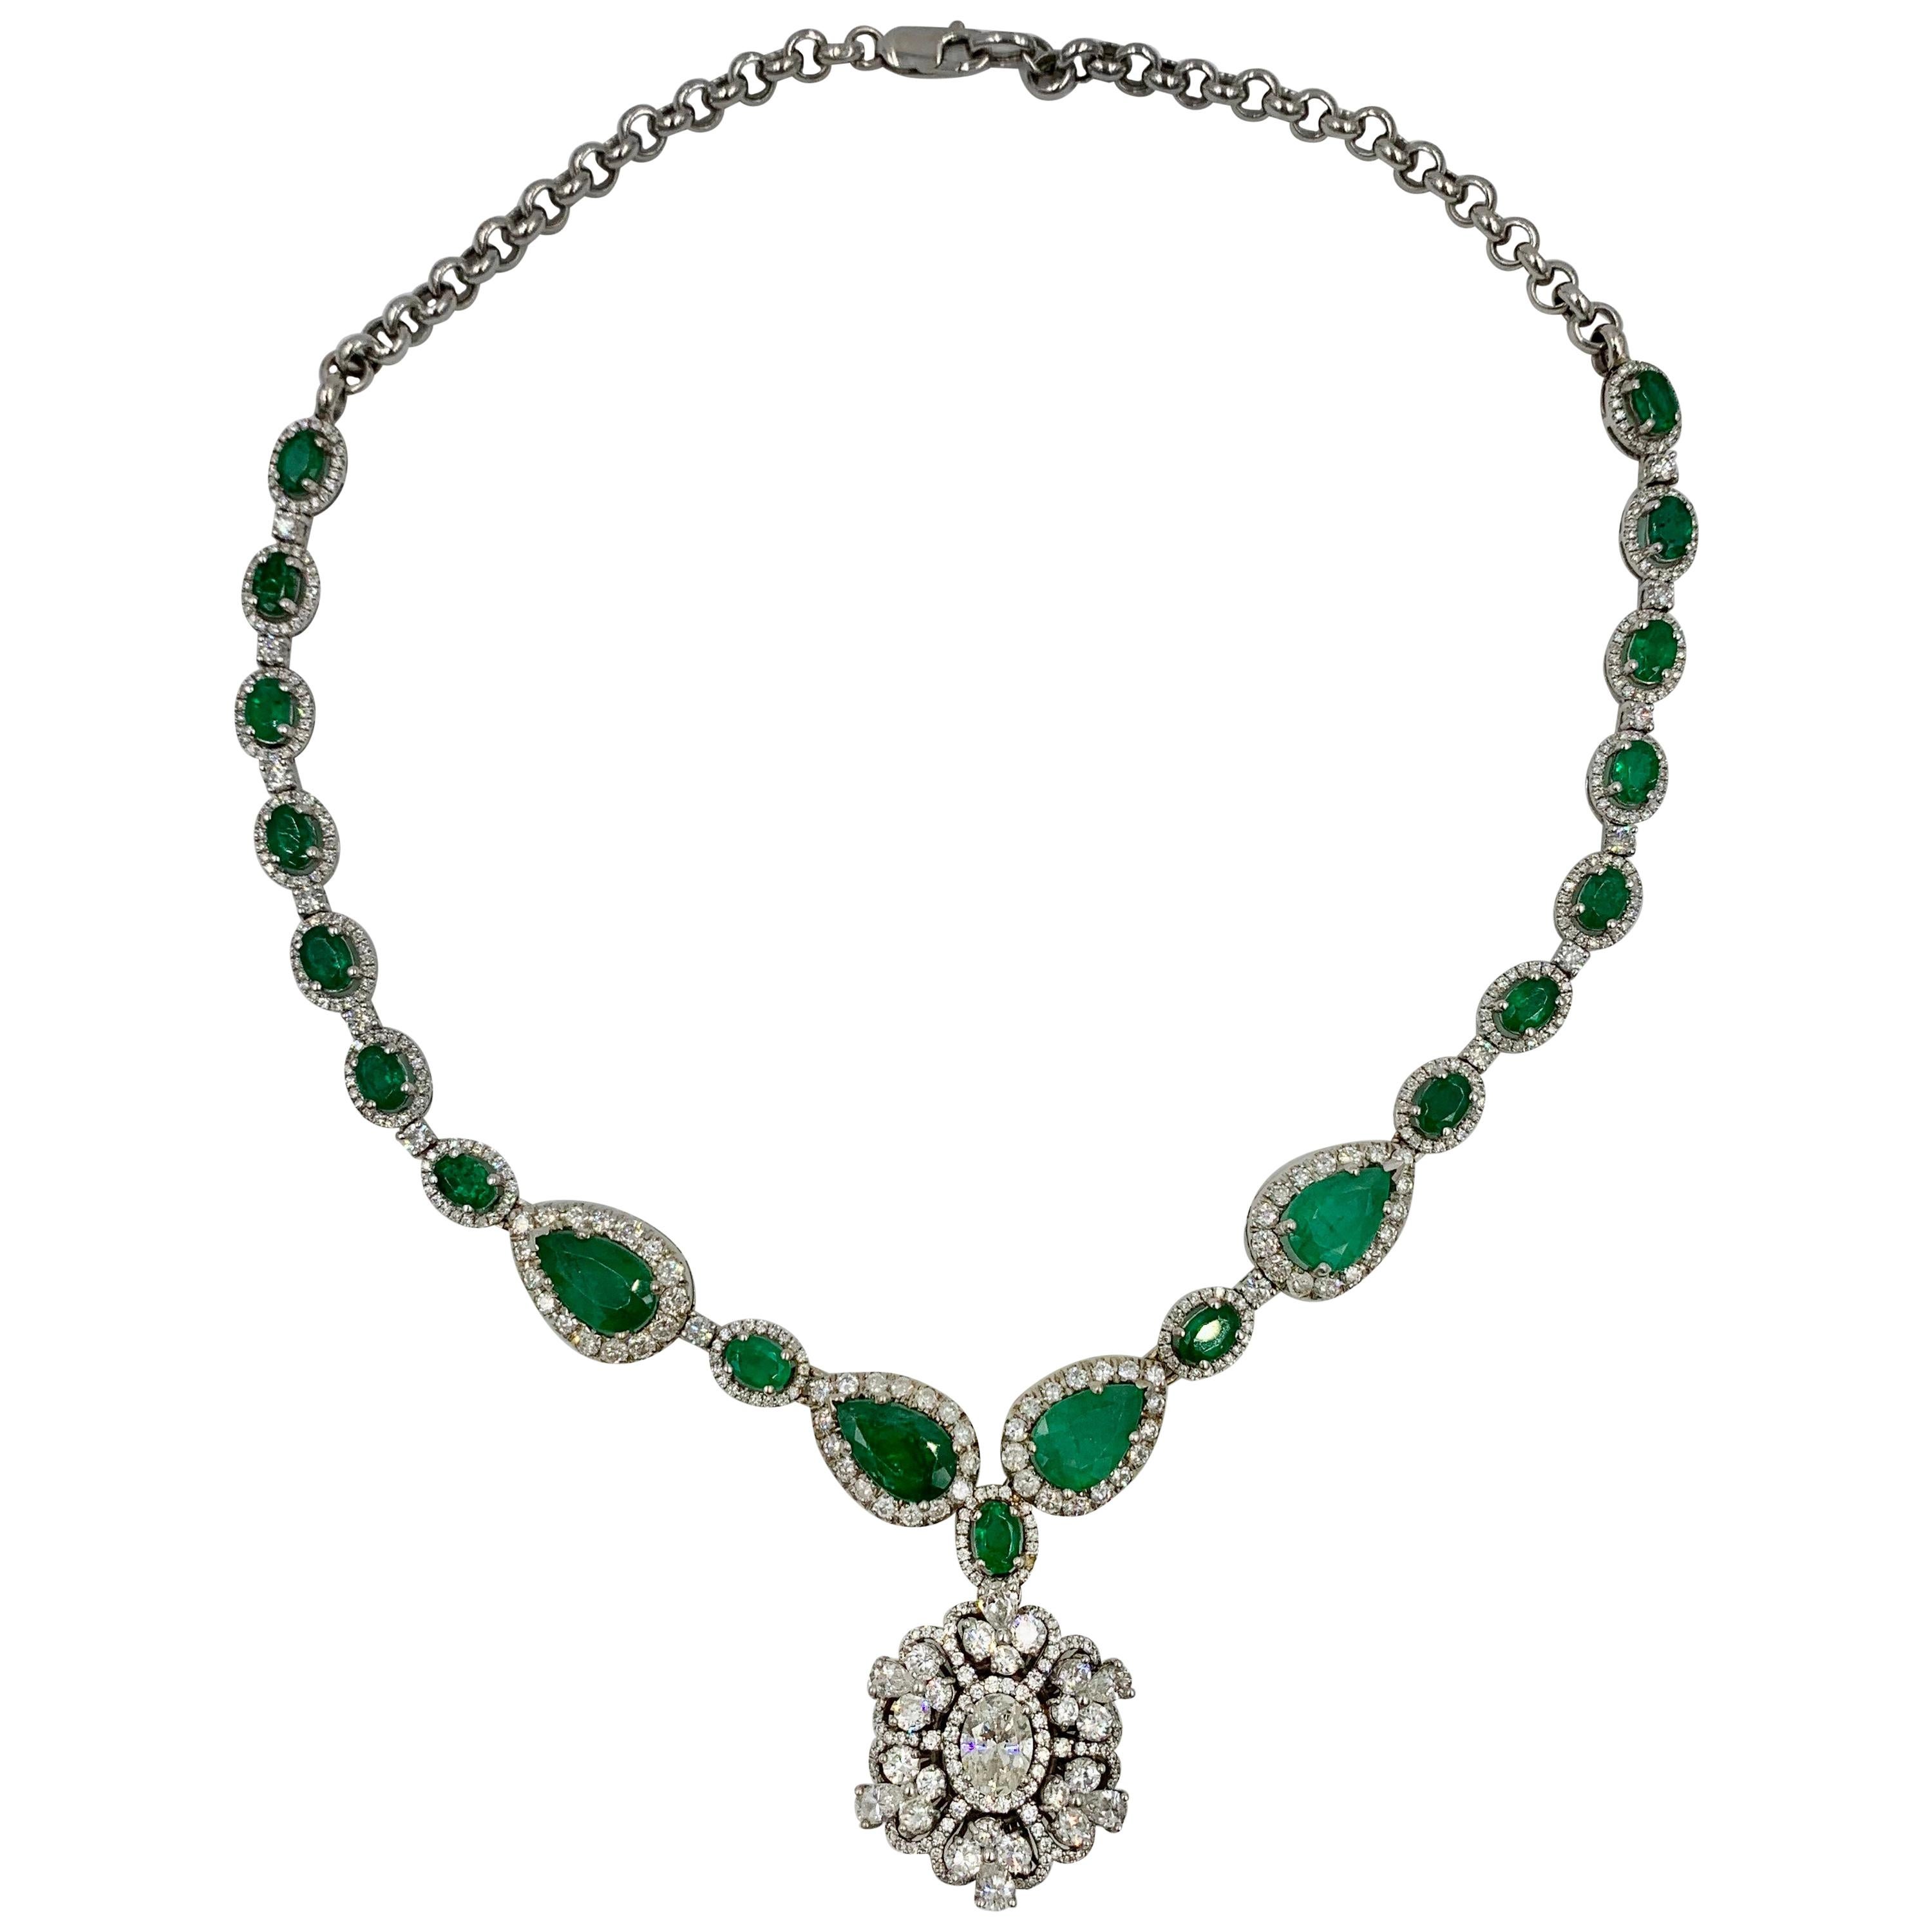 A spectacular Antique Estate Emerald and Diamond Pendant Statement Necklace of great beauty.   The dramatic necklace features a Diamond Pendant with a central oval Brilliant Cut Diamond of approximately 1 Carat.  The center Diamond is a gorgeous K/L